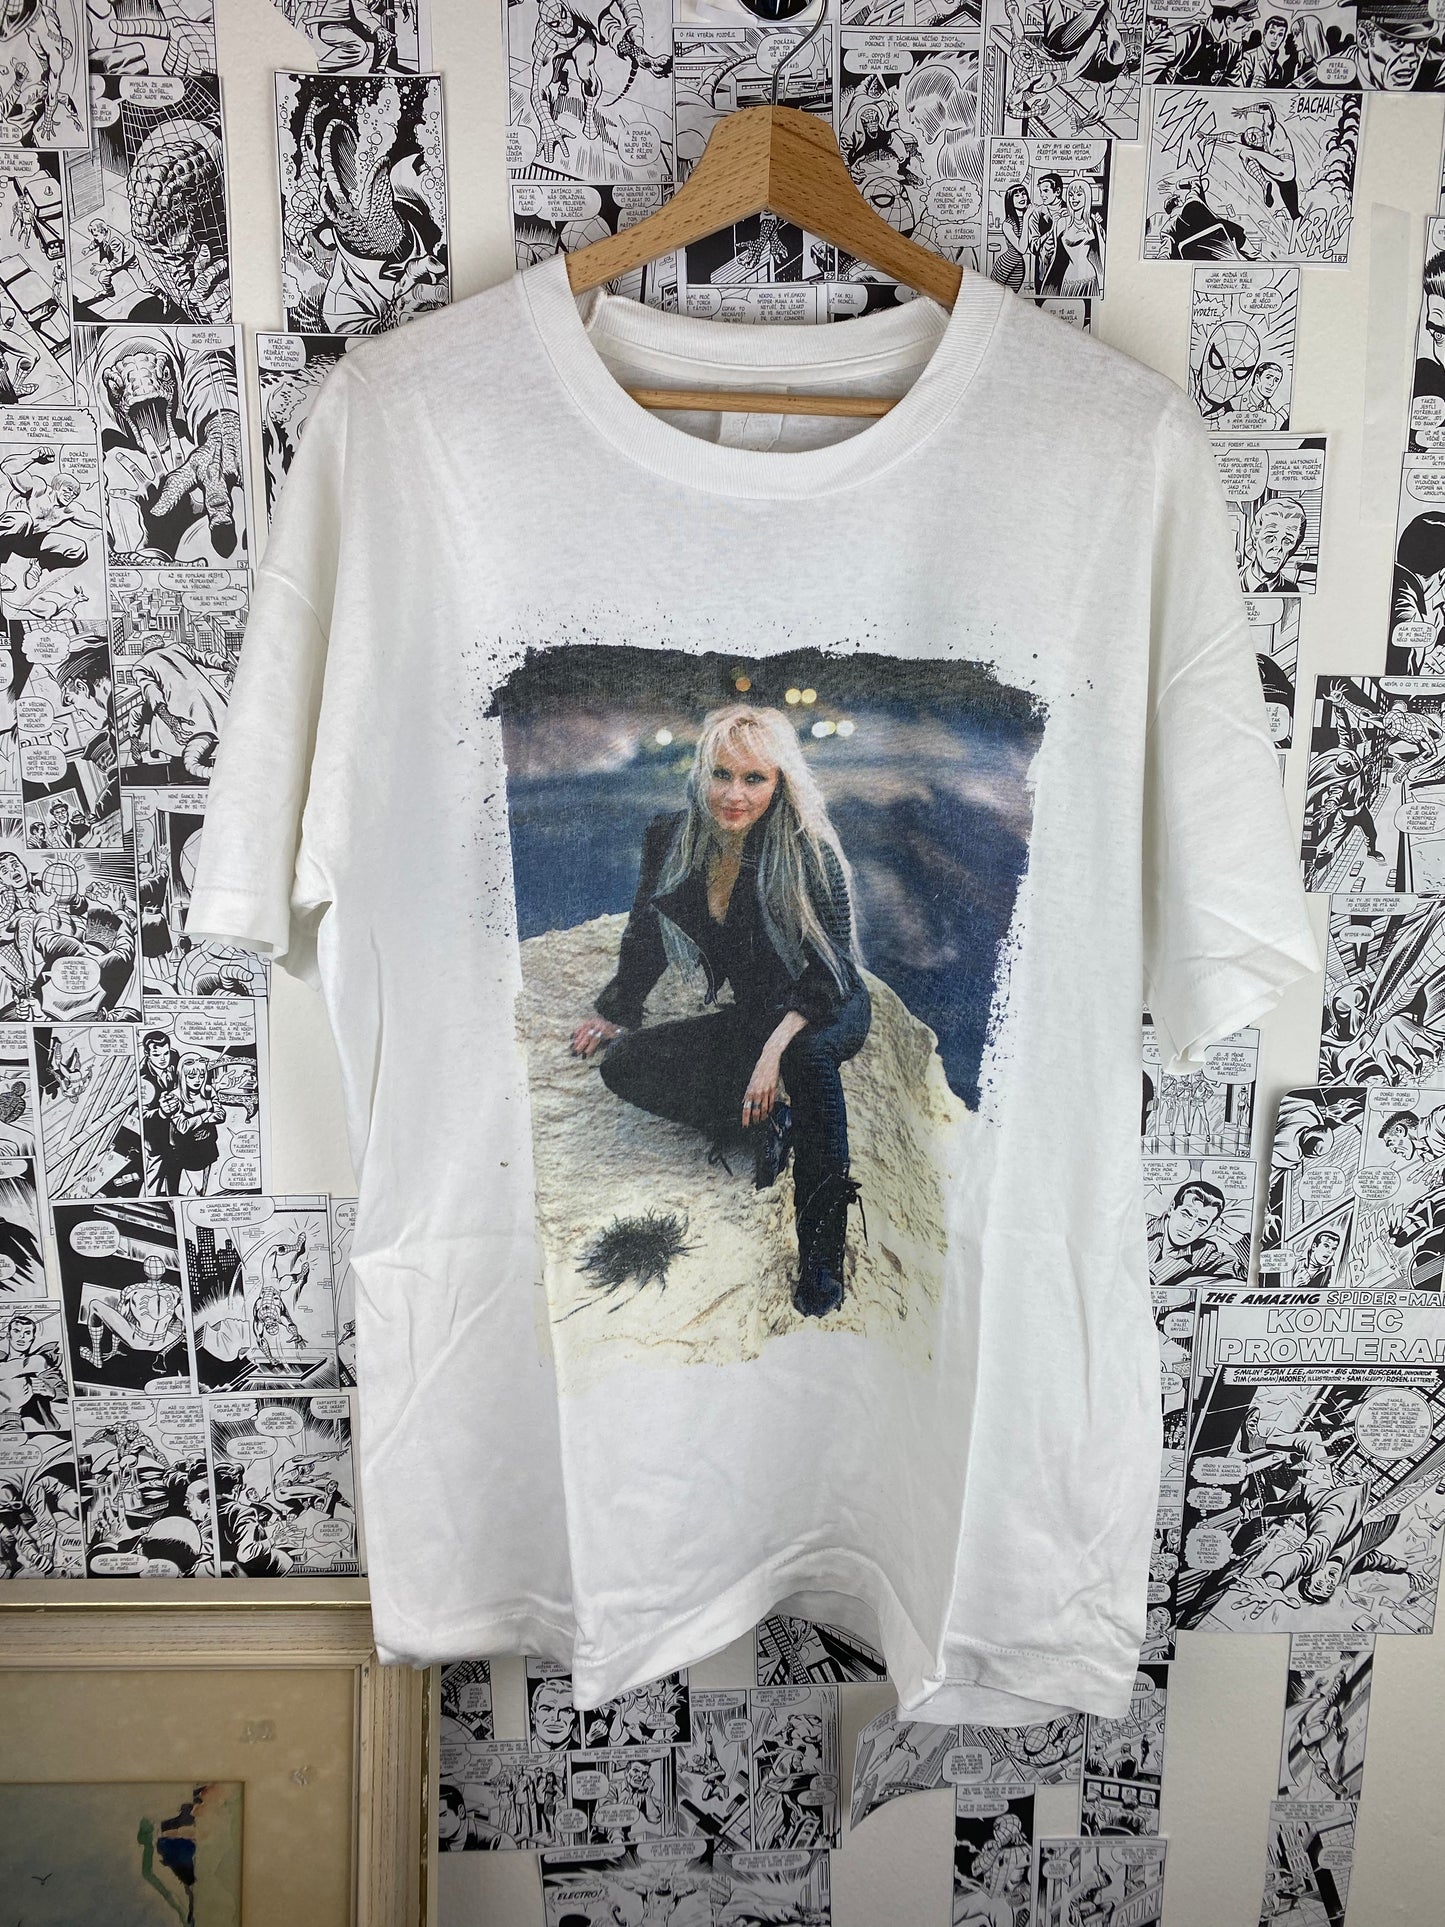 Vintage Doro “Love is the thrill” 1995 t-shirt - size XL